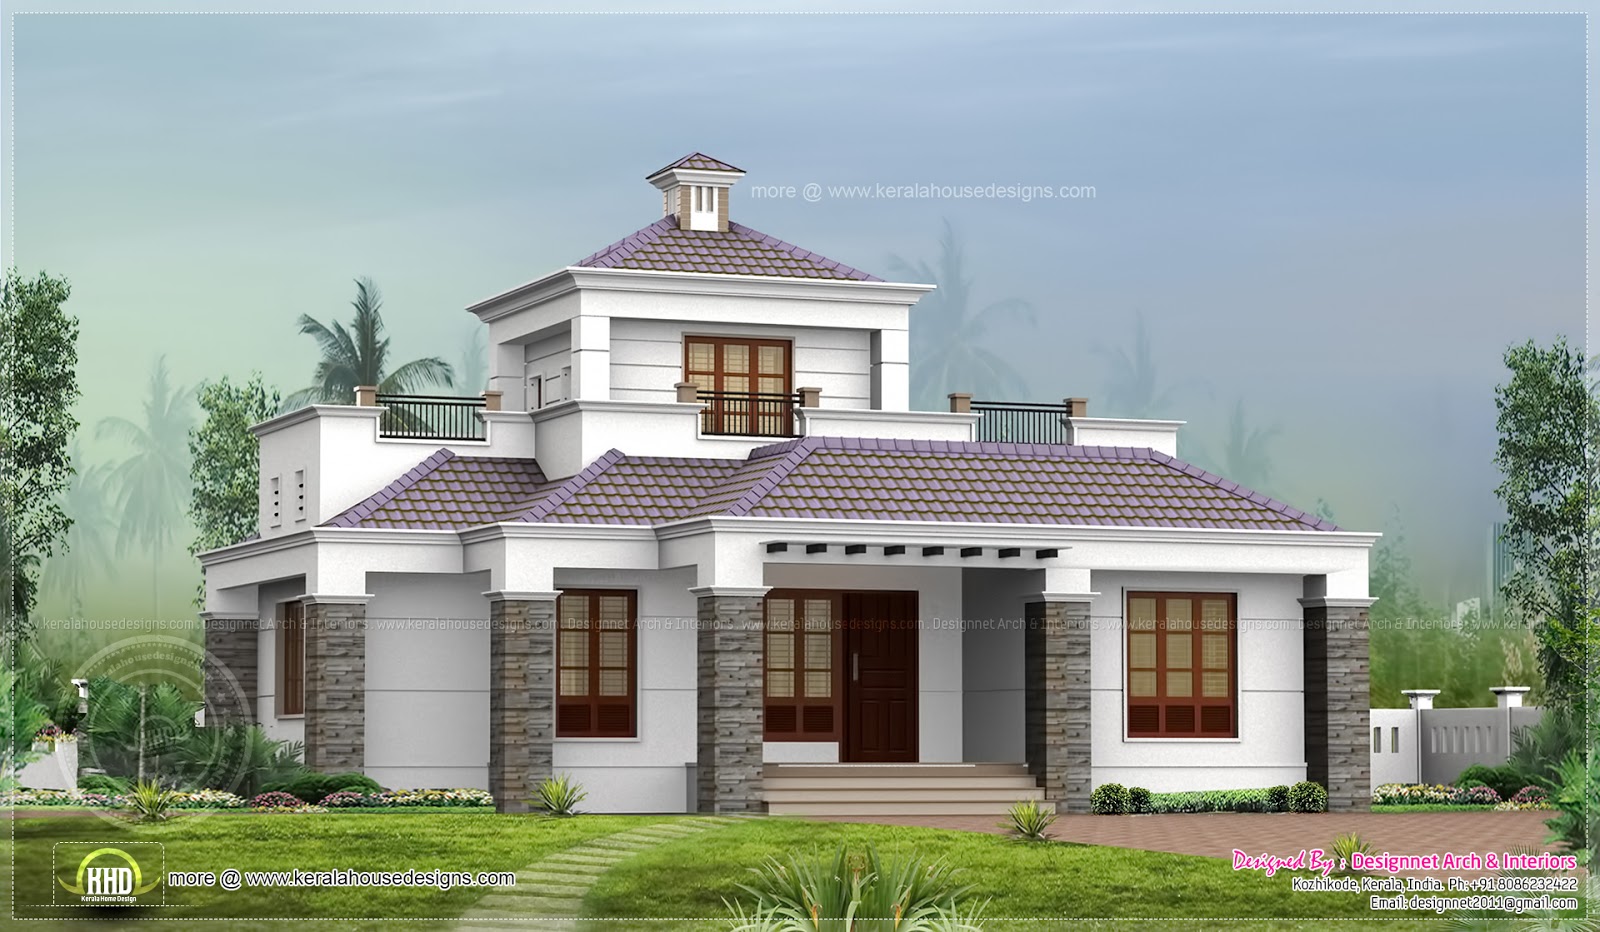 Single Floor Home With Stair Room In 1500 Sq Ft Kerala Home Design And Floor Plans 8000 Houses